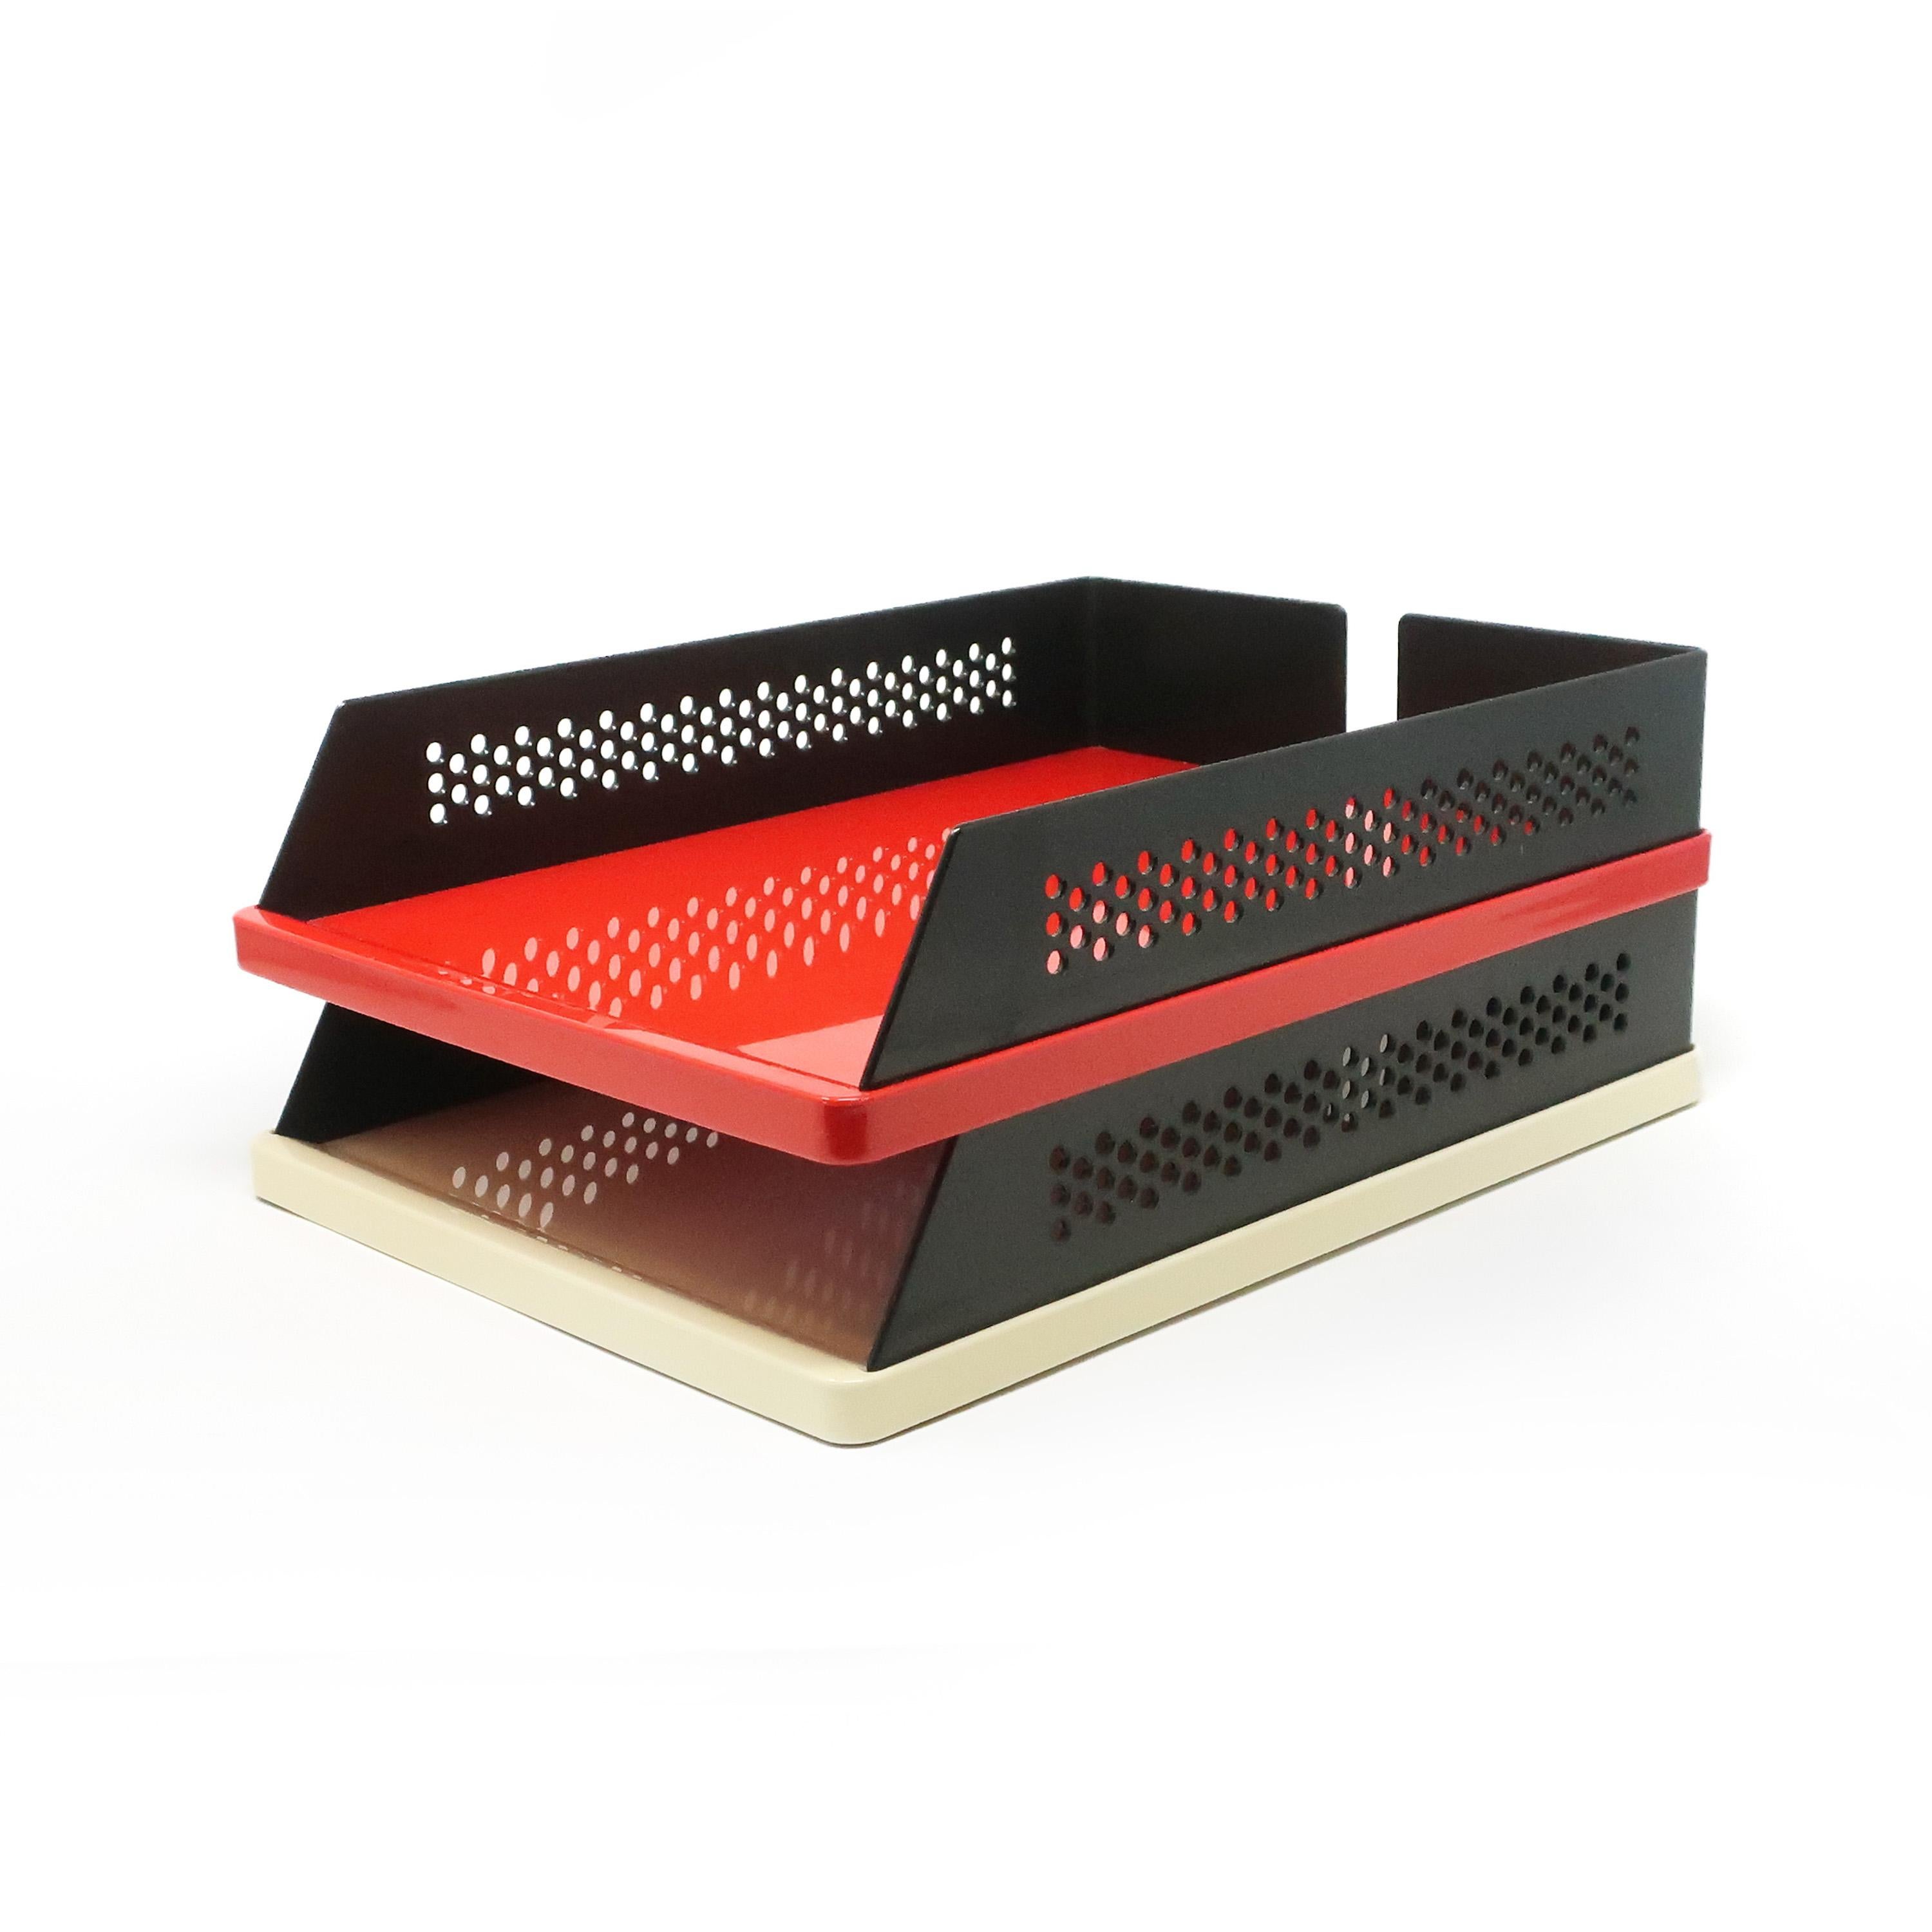 A pair of stylish, stackable red and white plastic letter trays with black accents designed by Raul Barbieri and Giorgio Marianelli for Rexite in 1980. The Babele 940 is 1980s Italian postmodern design at its finest, plus they are stackable and